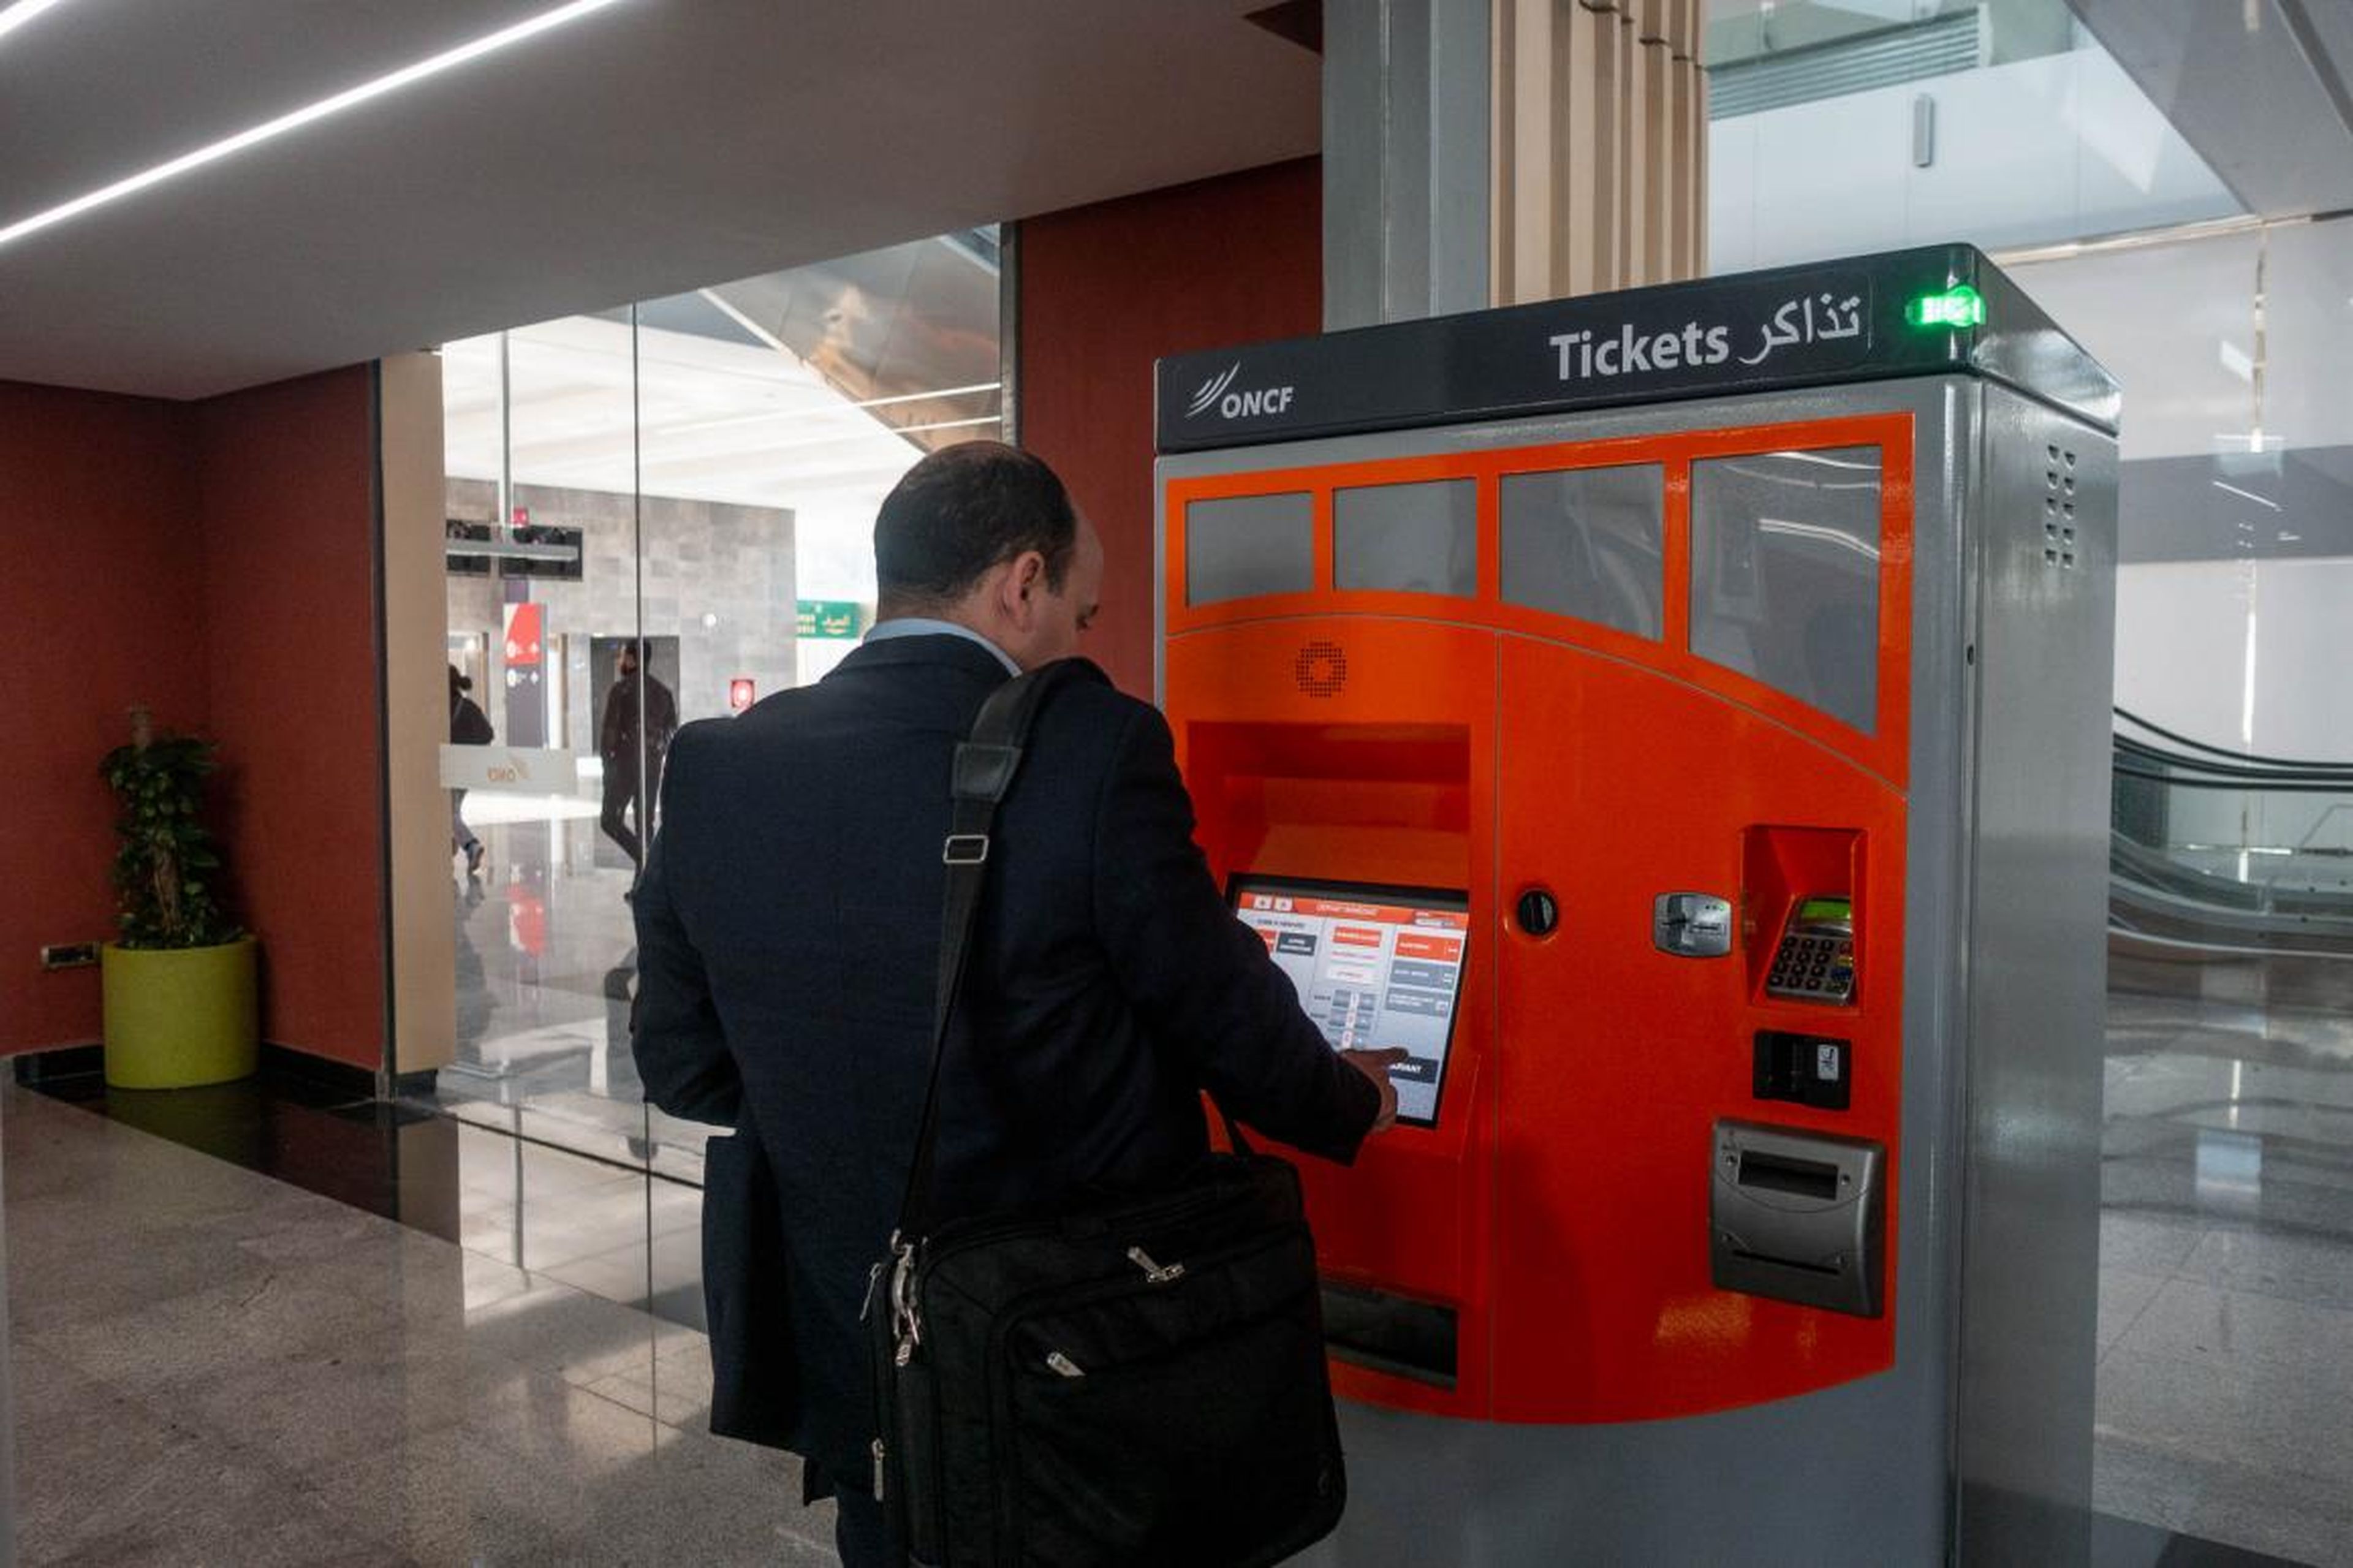 The machines are easy enough to use. Anyone who has visited a major city and used the metro system can figure it out. It accepts cash and credit cards.